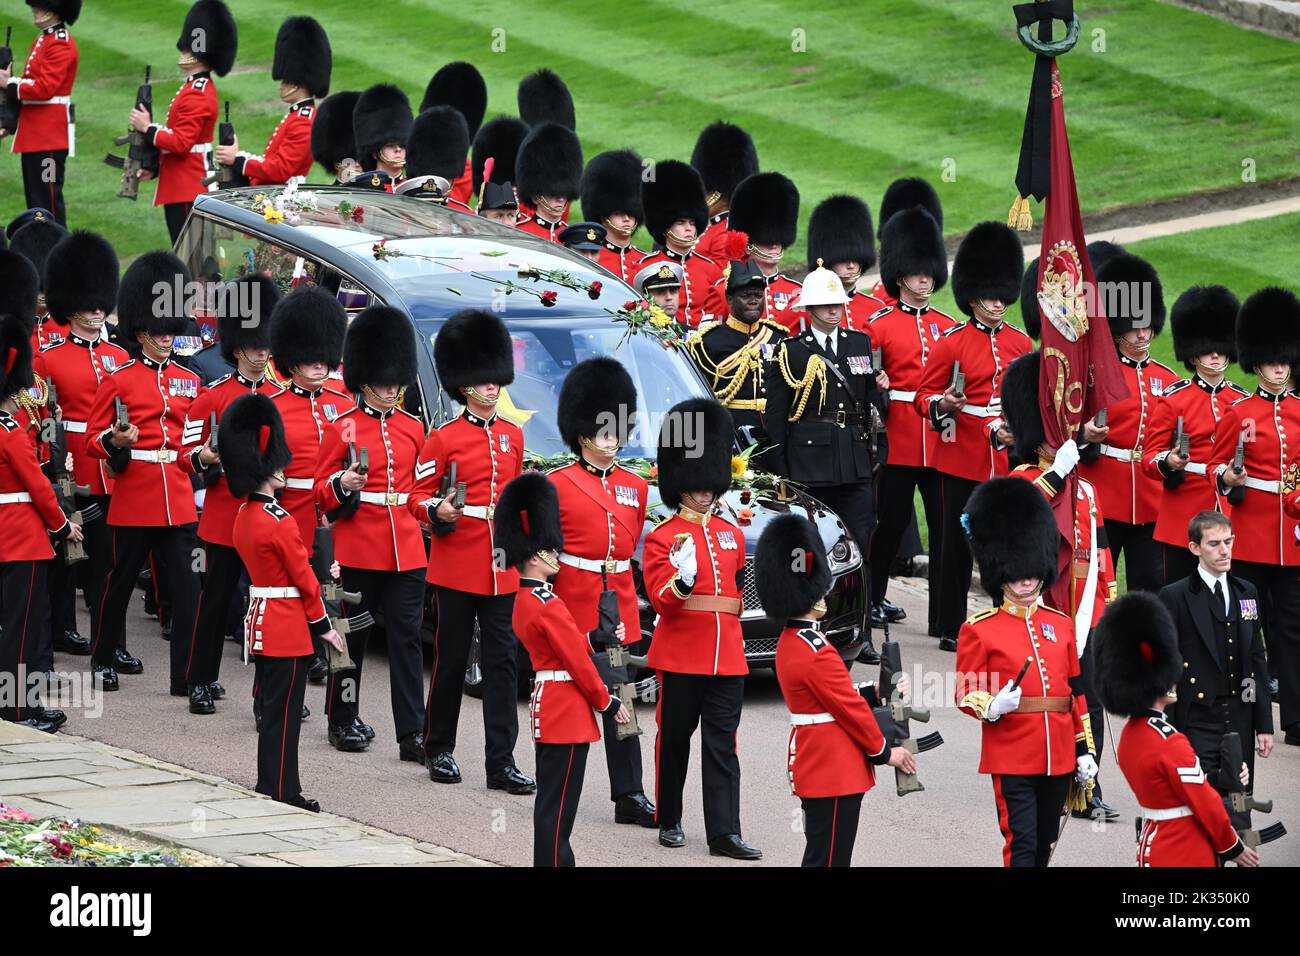 Windsor, England. UK. 19 September, 2022.  The coffin of Queen Elizabeth ll, carried in the State Hearse, arrives at Windsor Castle for a Committal Se Stock Photo